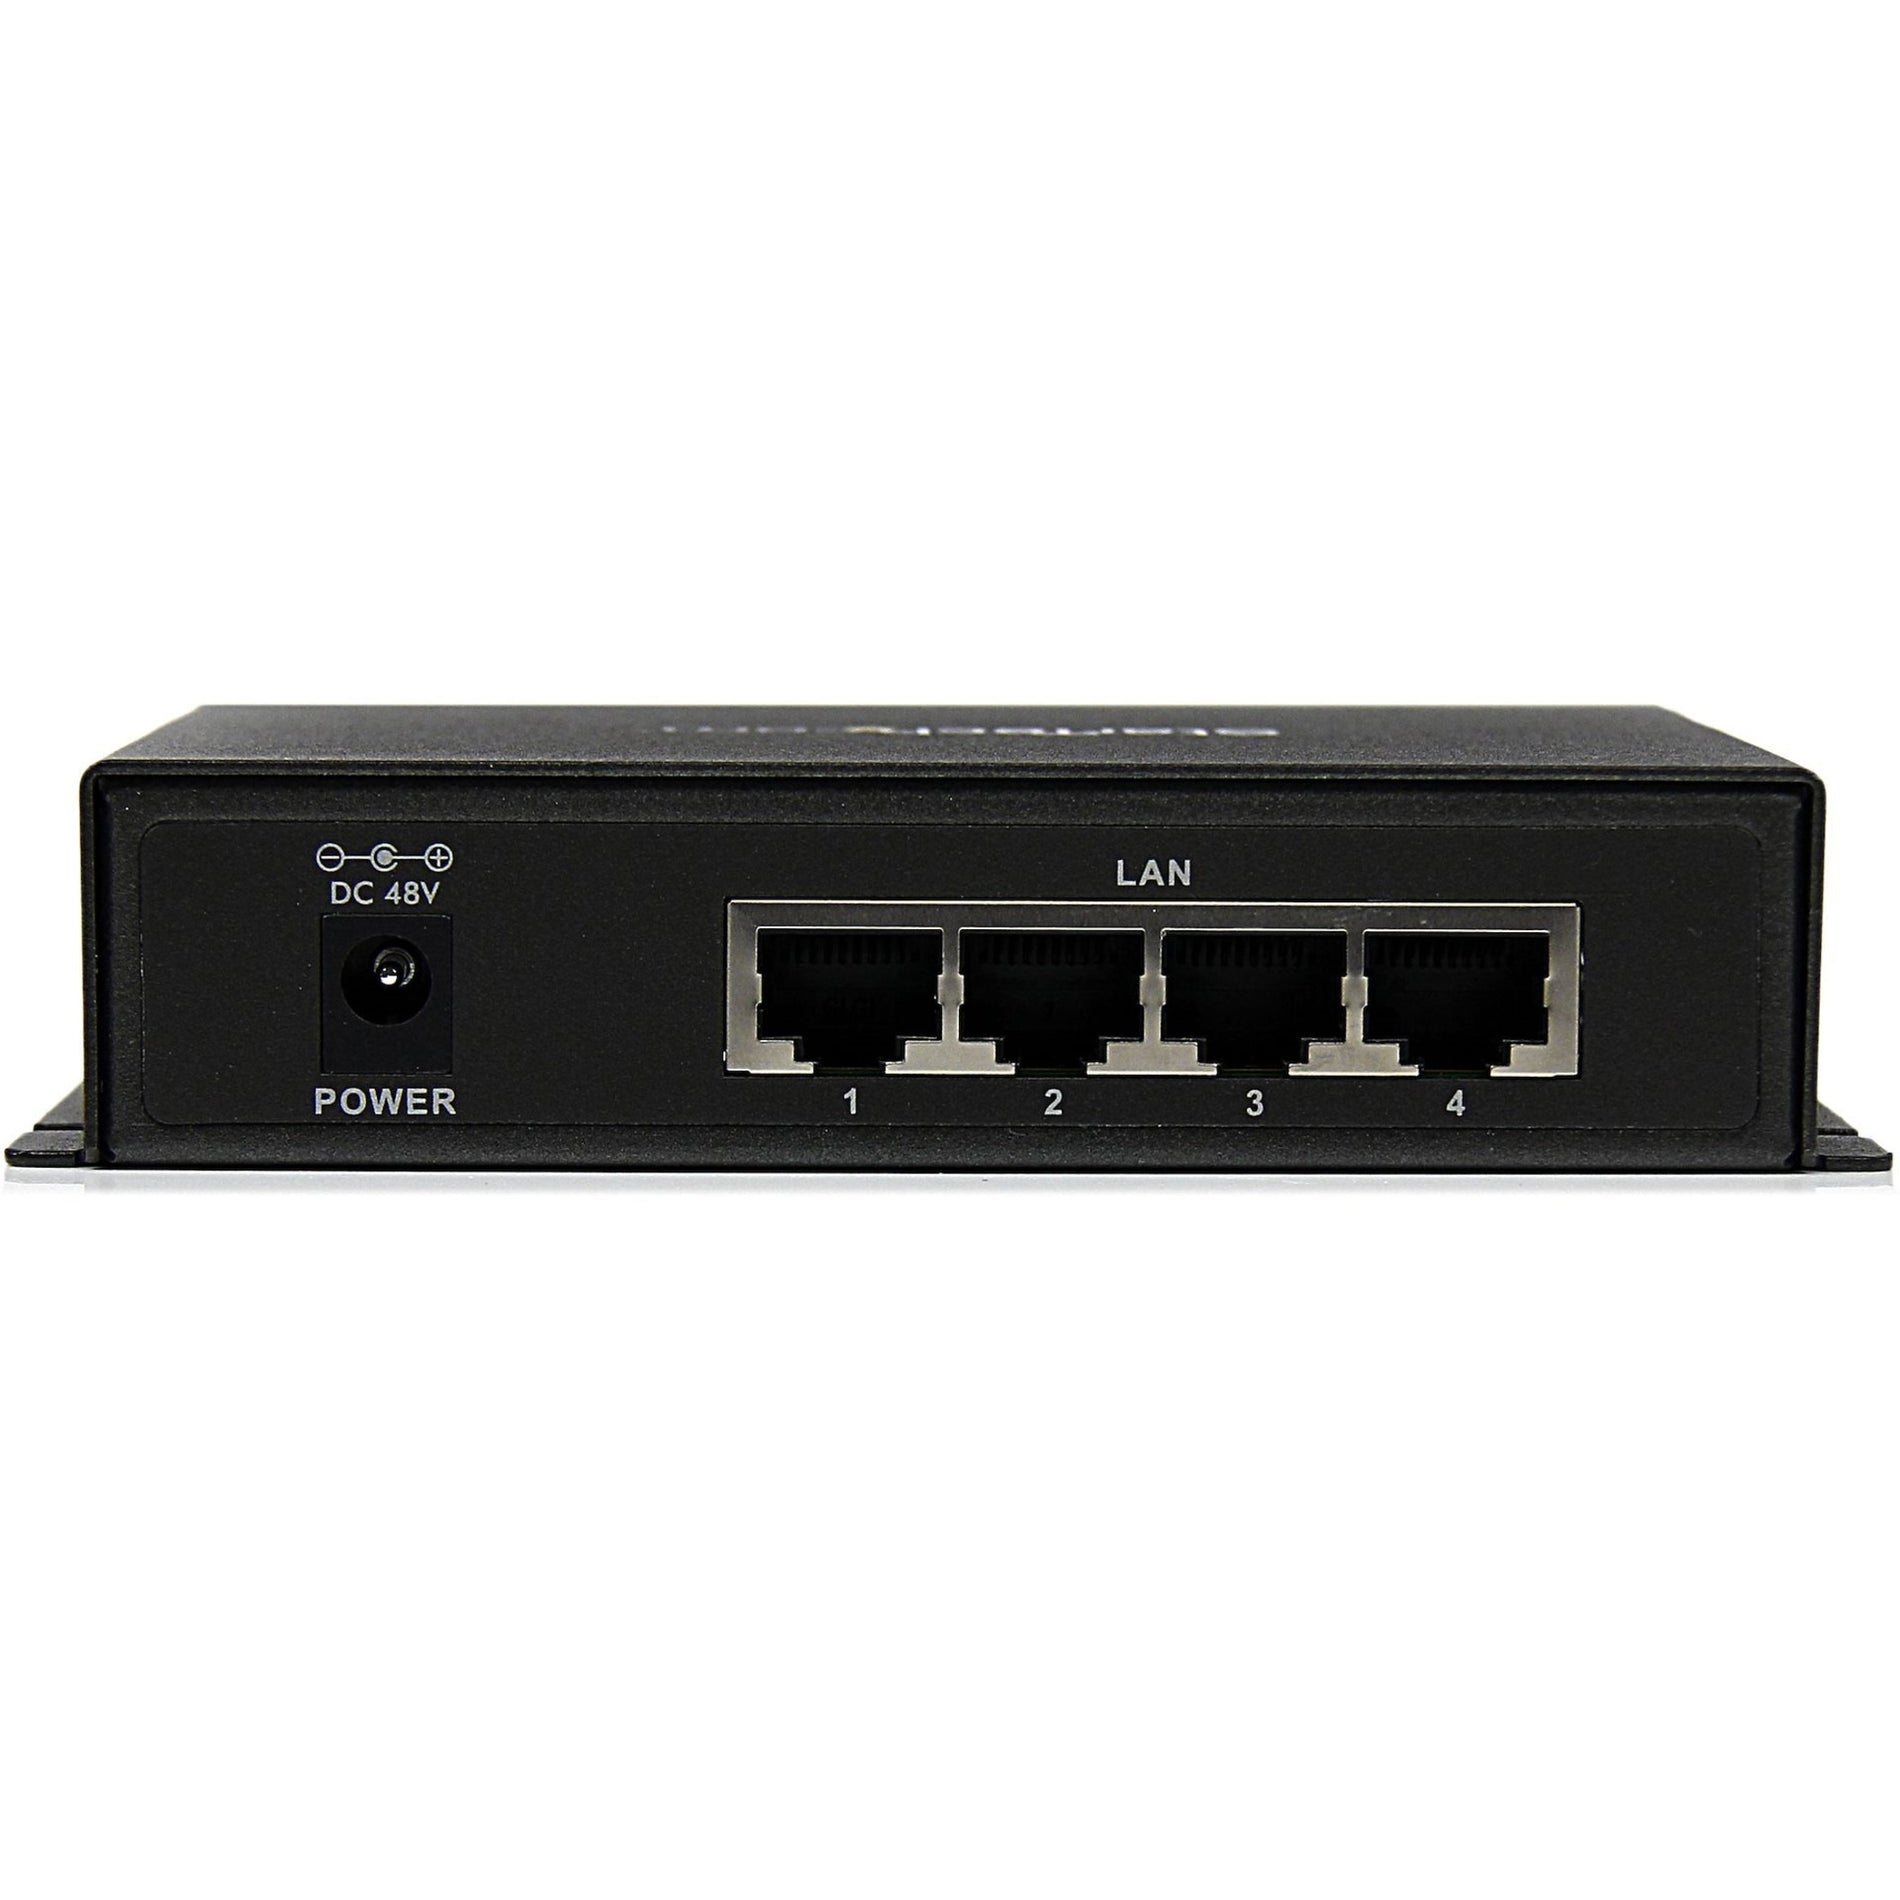 StarTech.com 5 Port Unmanaged Industrial Gigabit PoE Switch with 4 Power over Ethernet ports (IES51000POE)